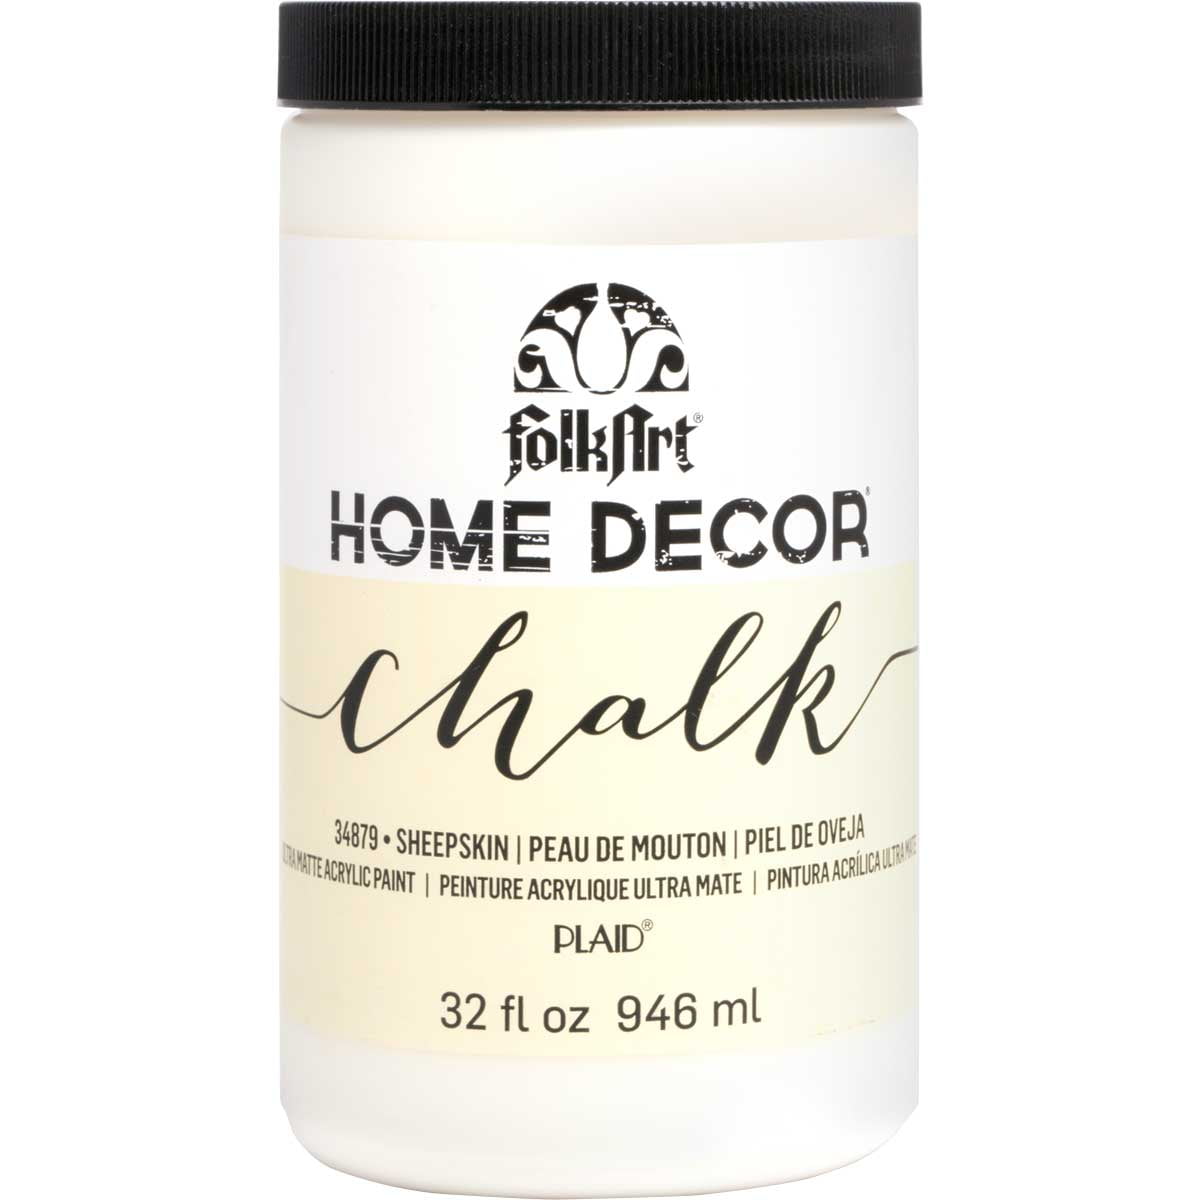 FolkArt Home Decor Chalk Furniture & Craft Paint in Assorted Colors, 32 Ounce, Sheepskin